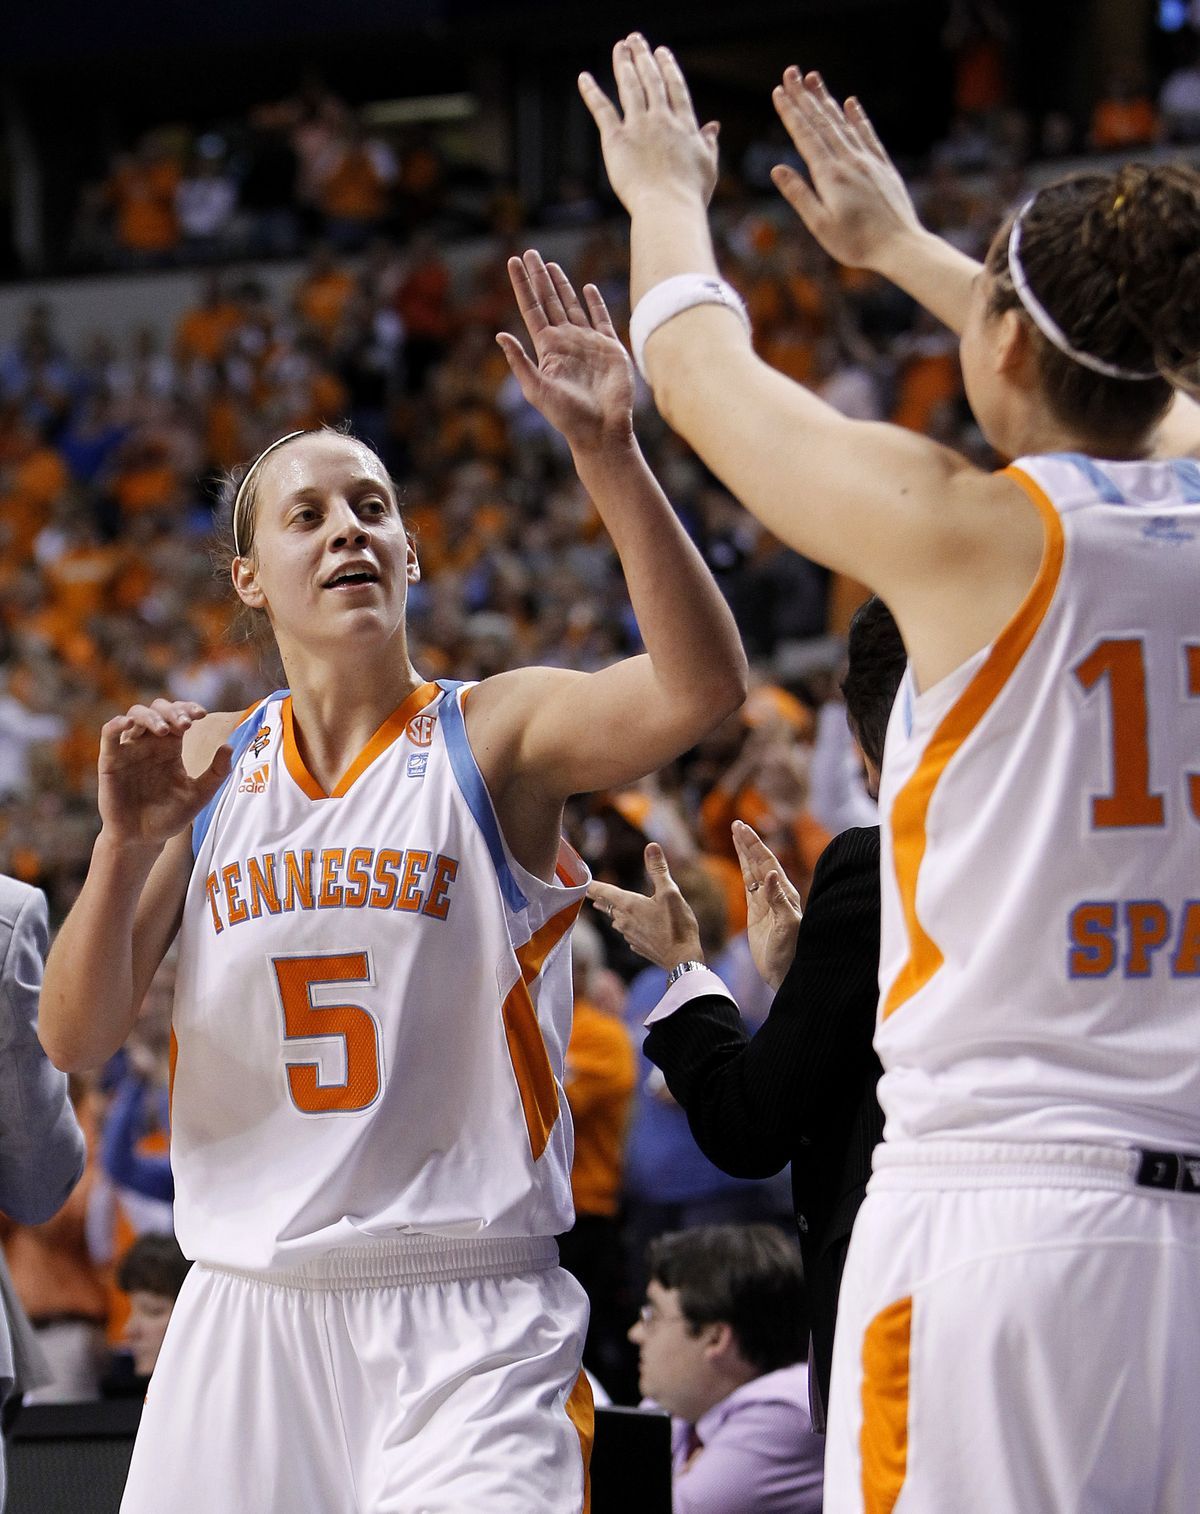 Senior Angie Bjorklund is congratulated as she leaves the SEC championship game. (Associated Press)